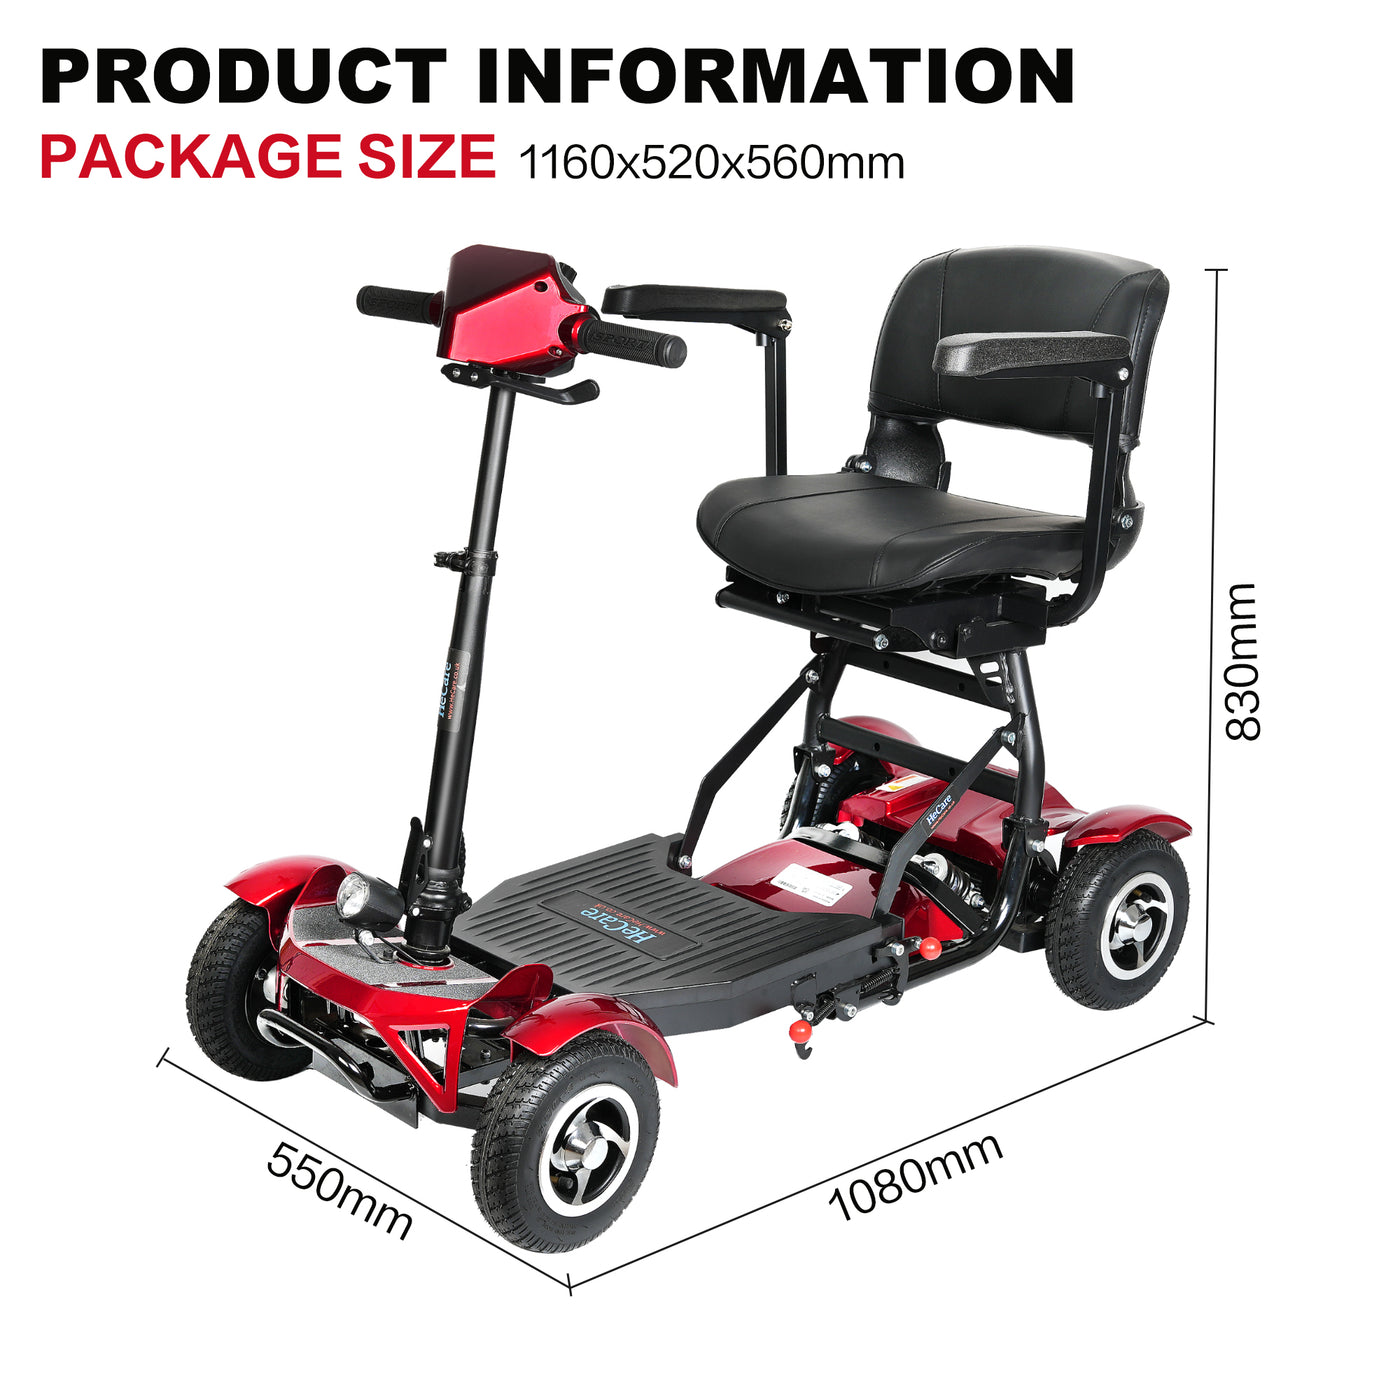 NEW Hecare Instant folding Lightweight Portable mobility scooter shoprider UK